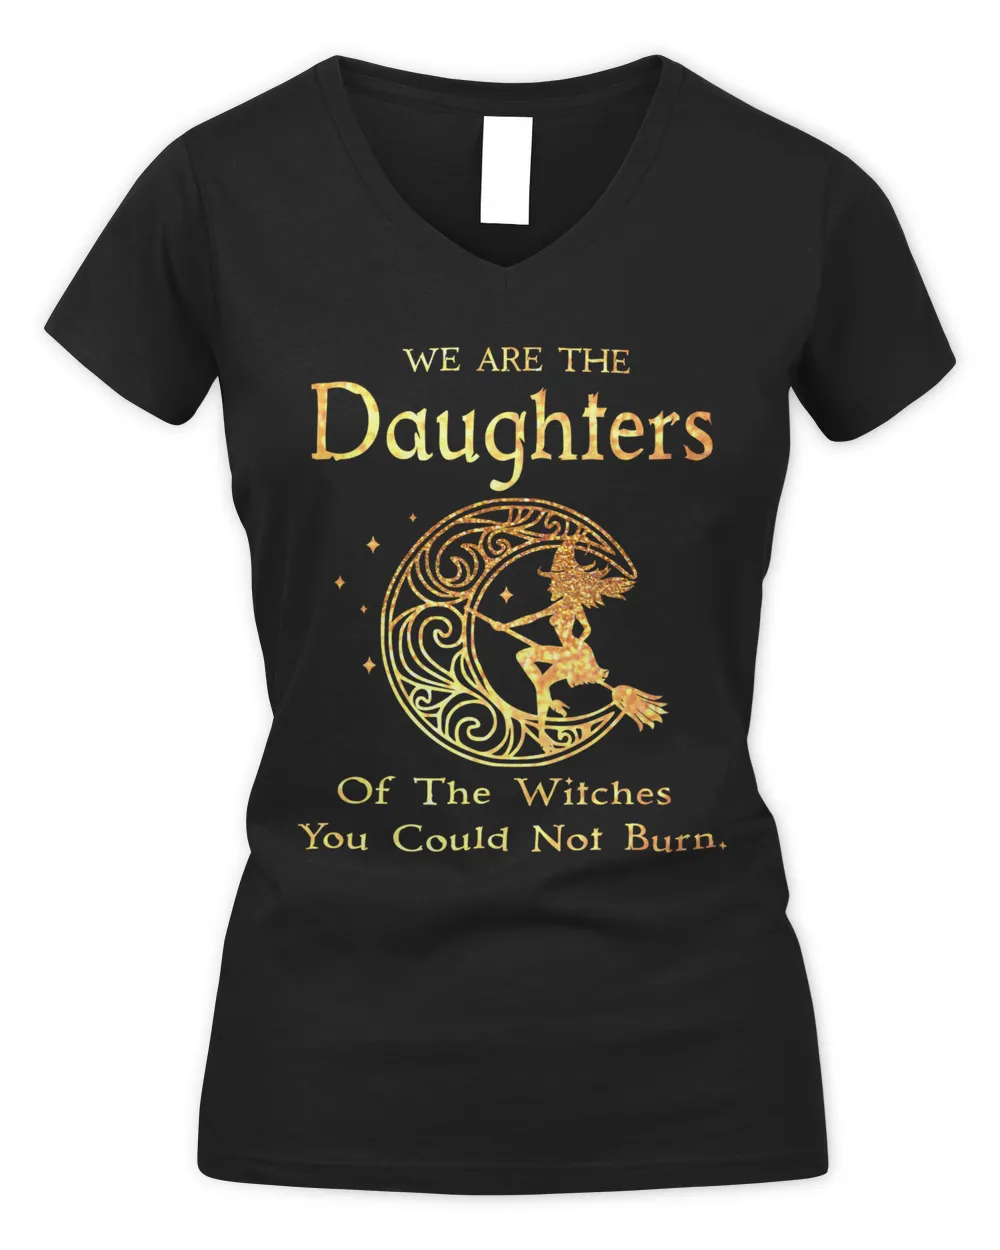 We are the Daughters of the witches gold girl moon